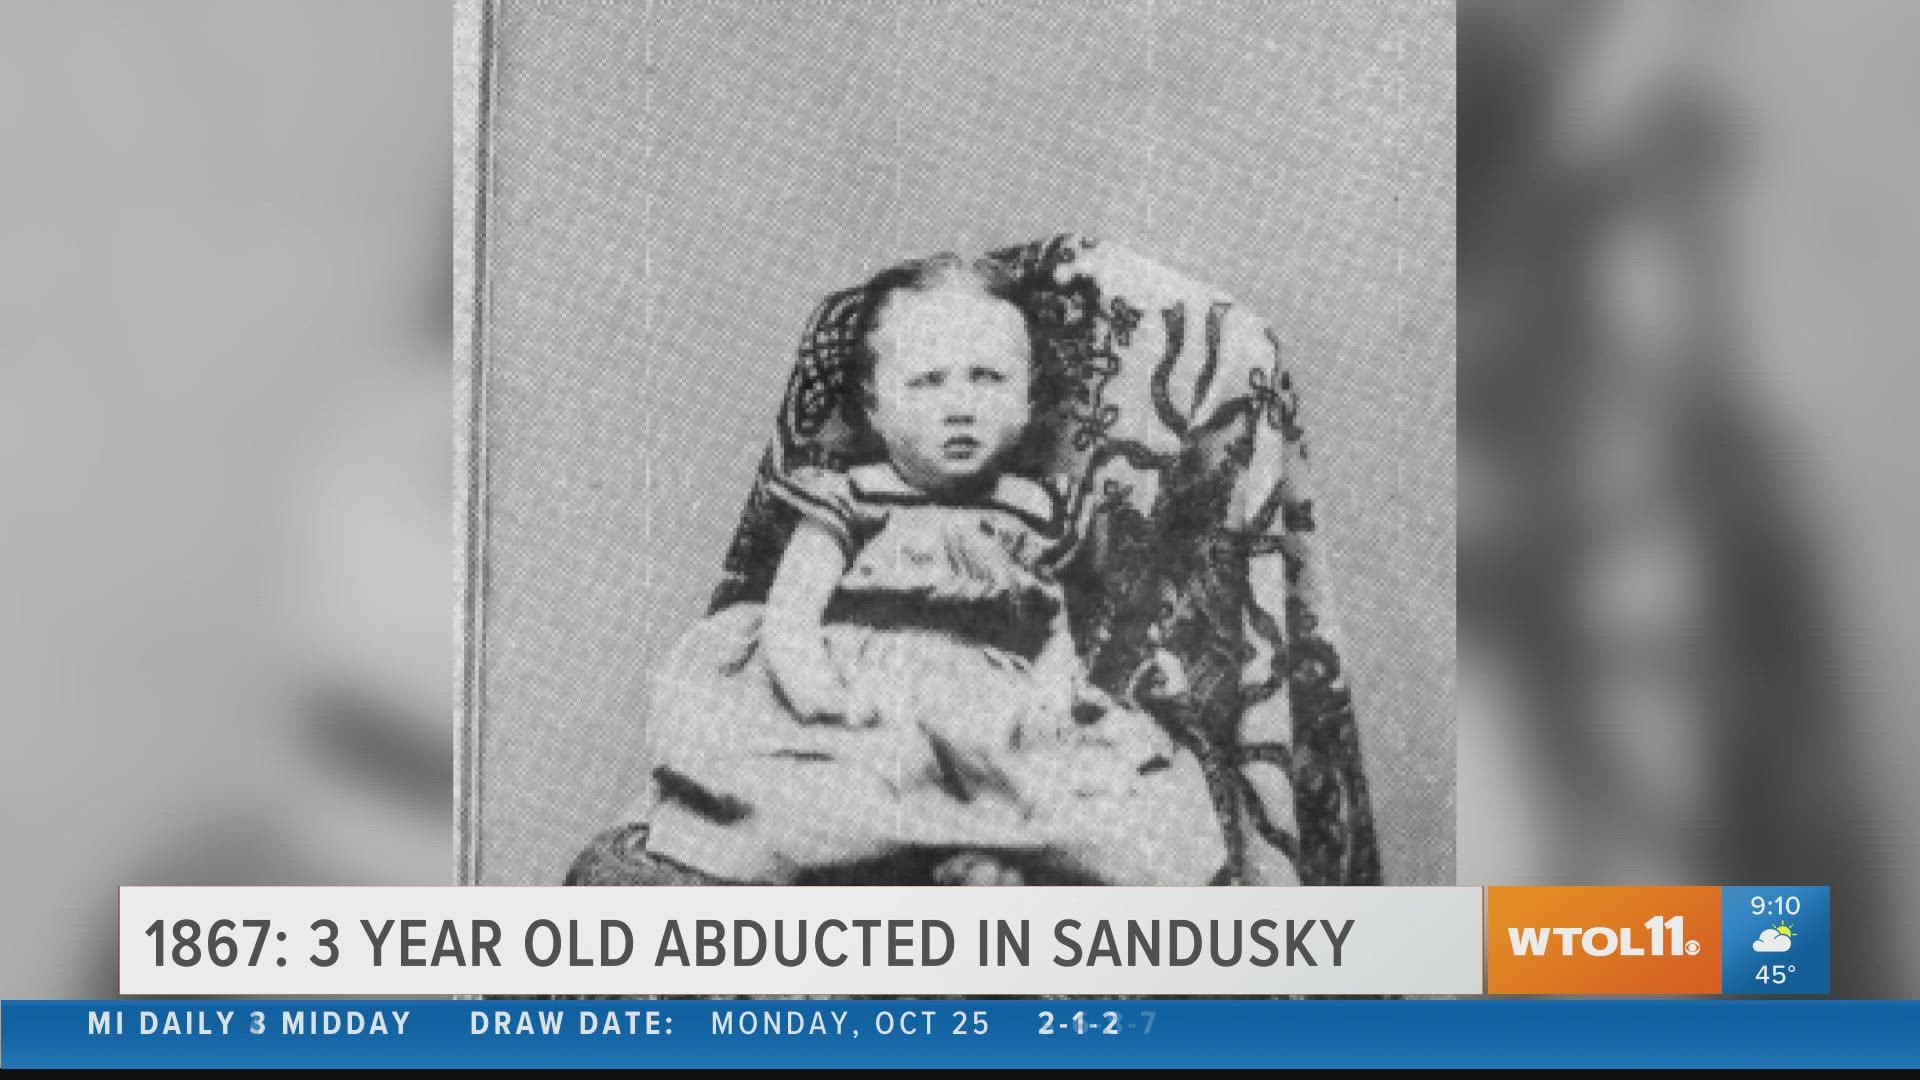 In 1867, a 3-year-old was abducted in Sandusky and wasn't found until 14 years later.